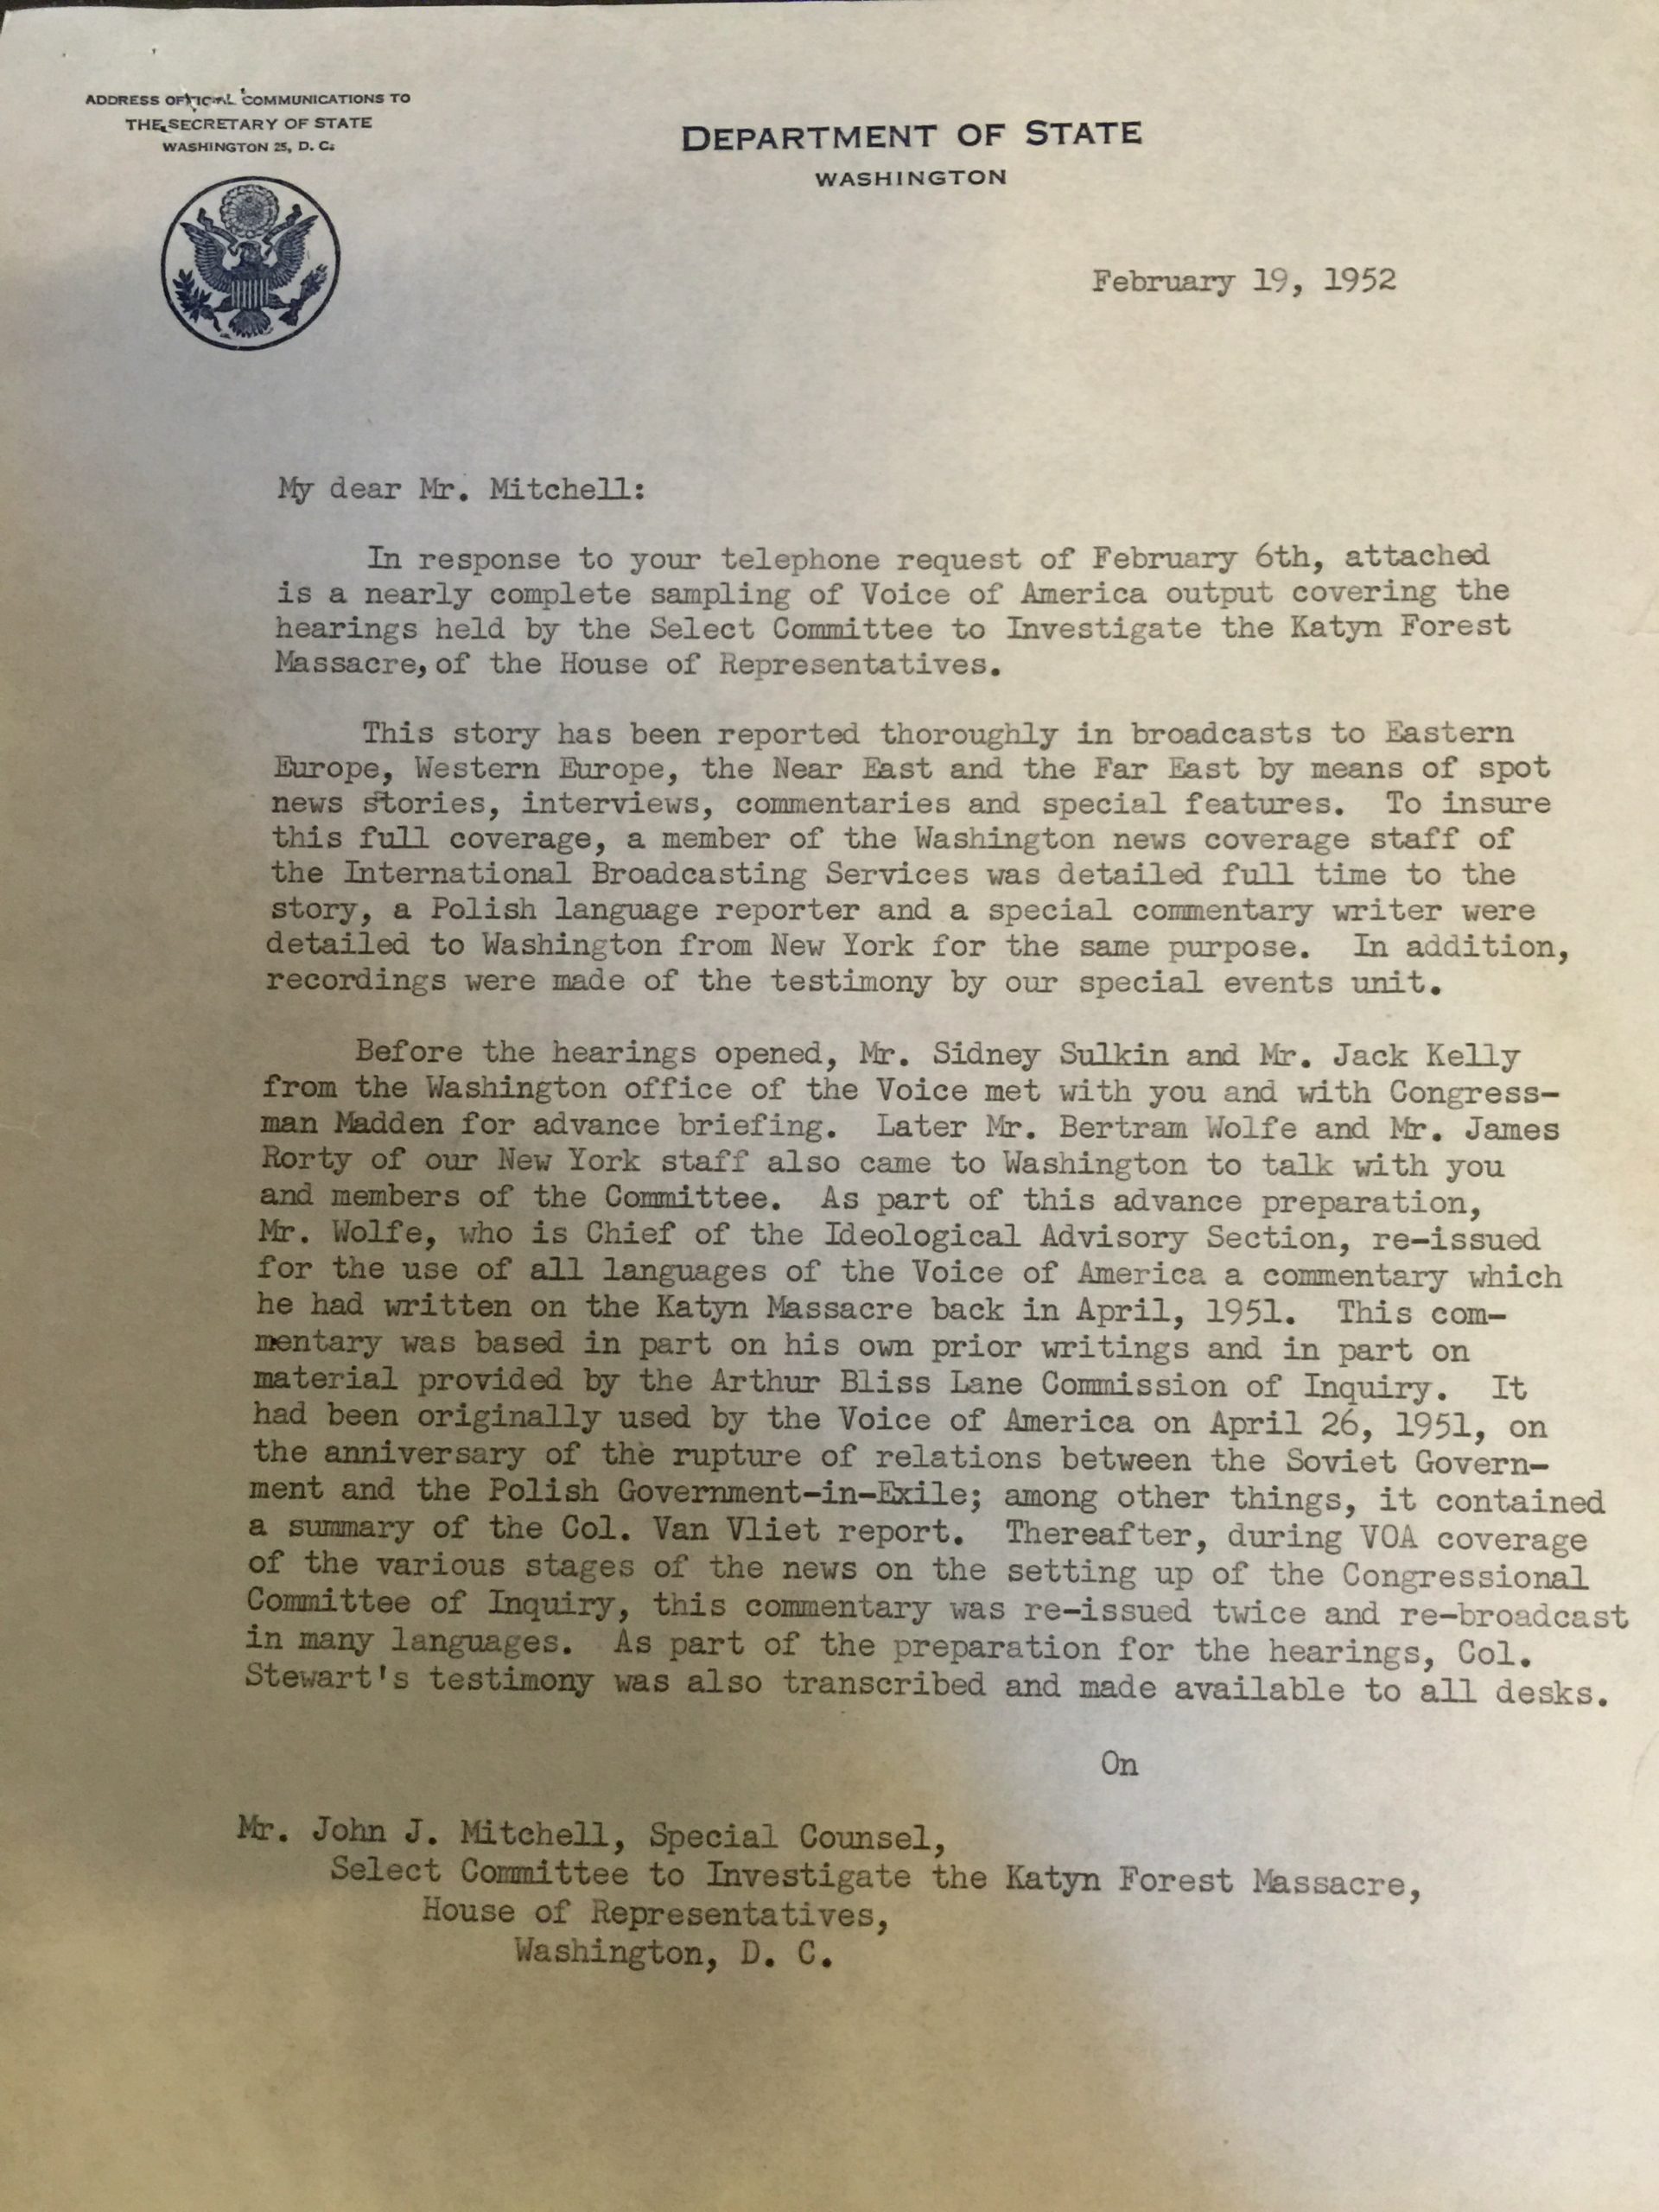 Memorandum from Wilson M. Compton, Administrator, United States Information Administration Department of State to John J. Mitchell, Special Counsel, Select Committee on the Katyn Forest Massacre, 82nd Congress, February 19, 1952, National Archives, Washington DC, Page 1